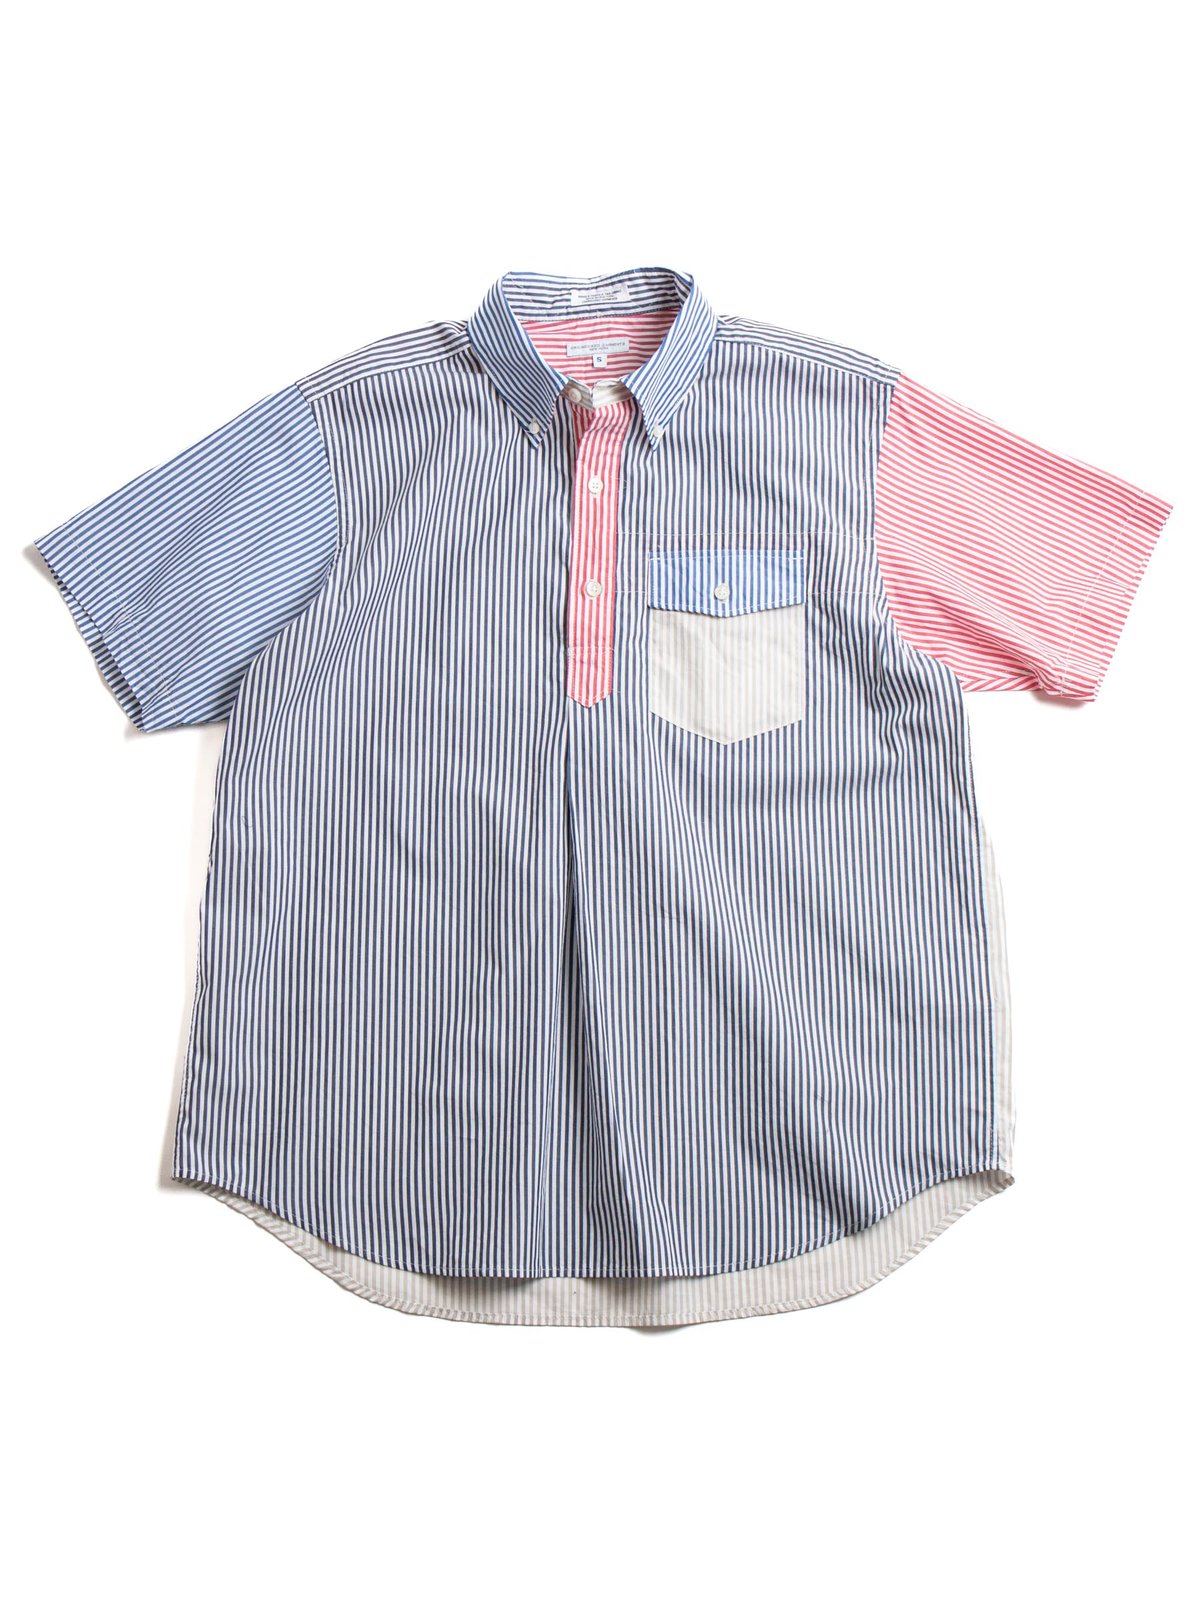 POPOVER DB SHIRT NAVY CANDY STRIPE BROADCLOTH - Image 1